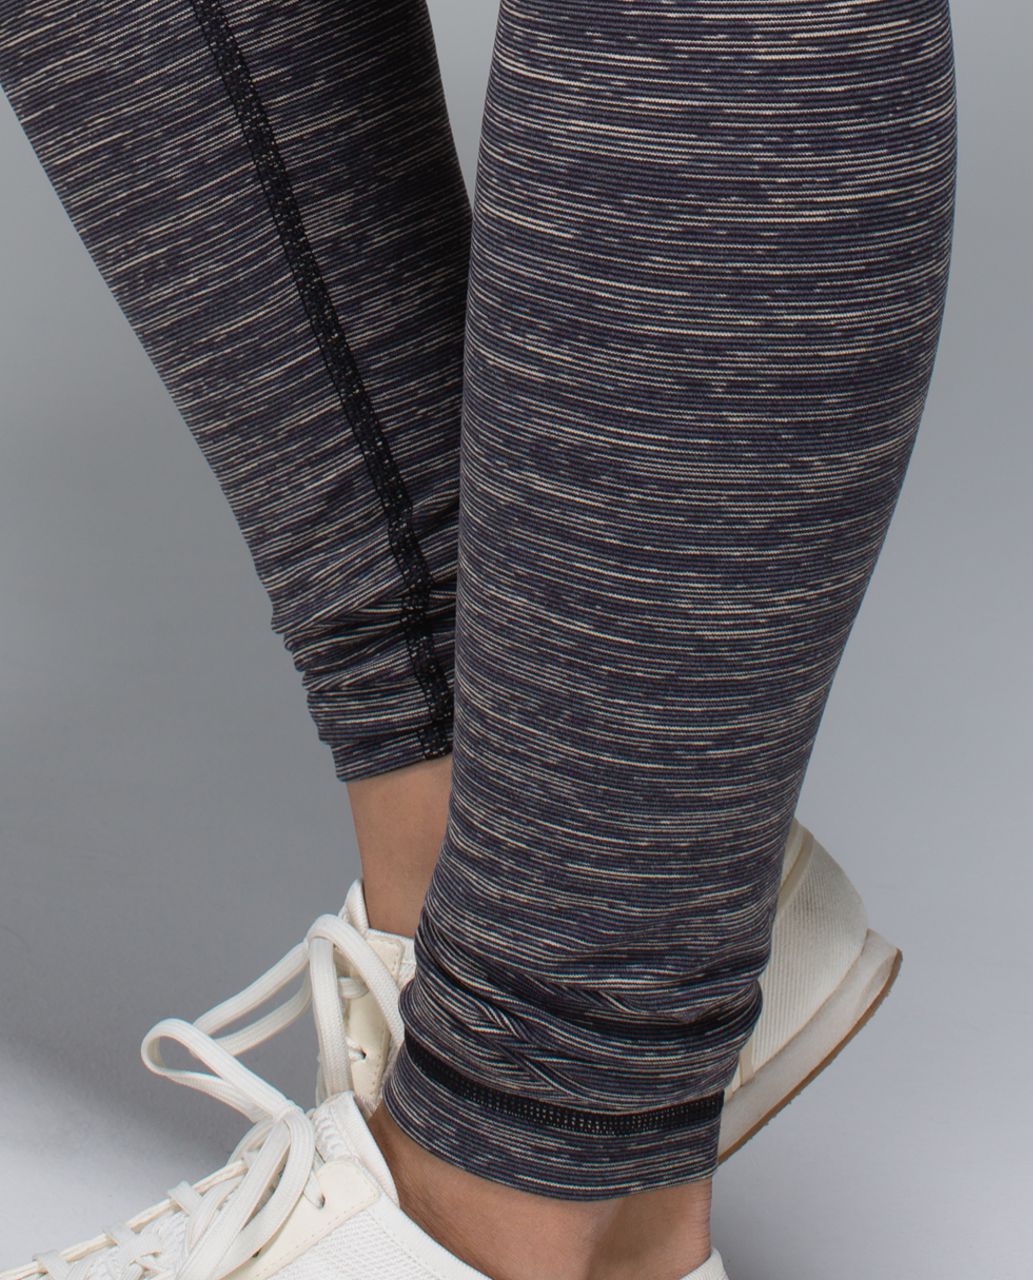 Lululemon Wunder Under Pant - Wee Are From Space Black Cashew / Black